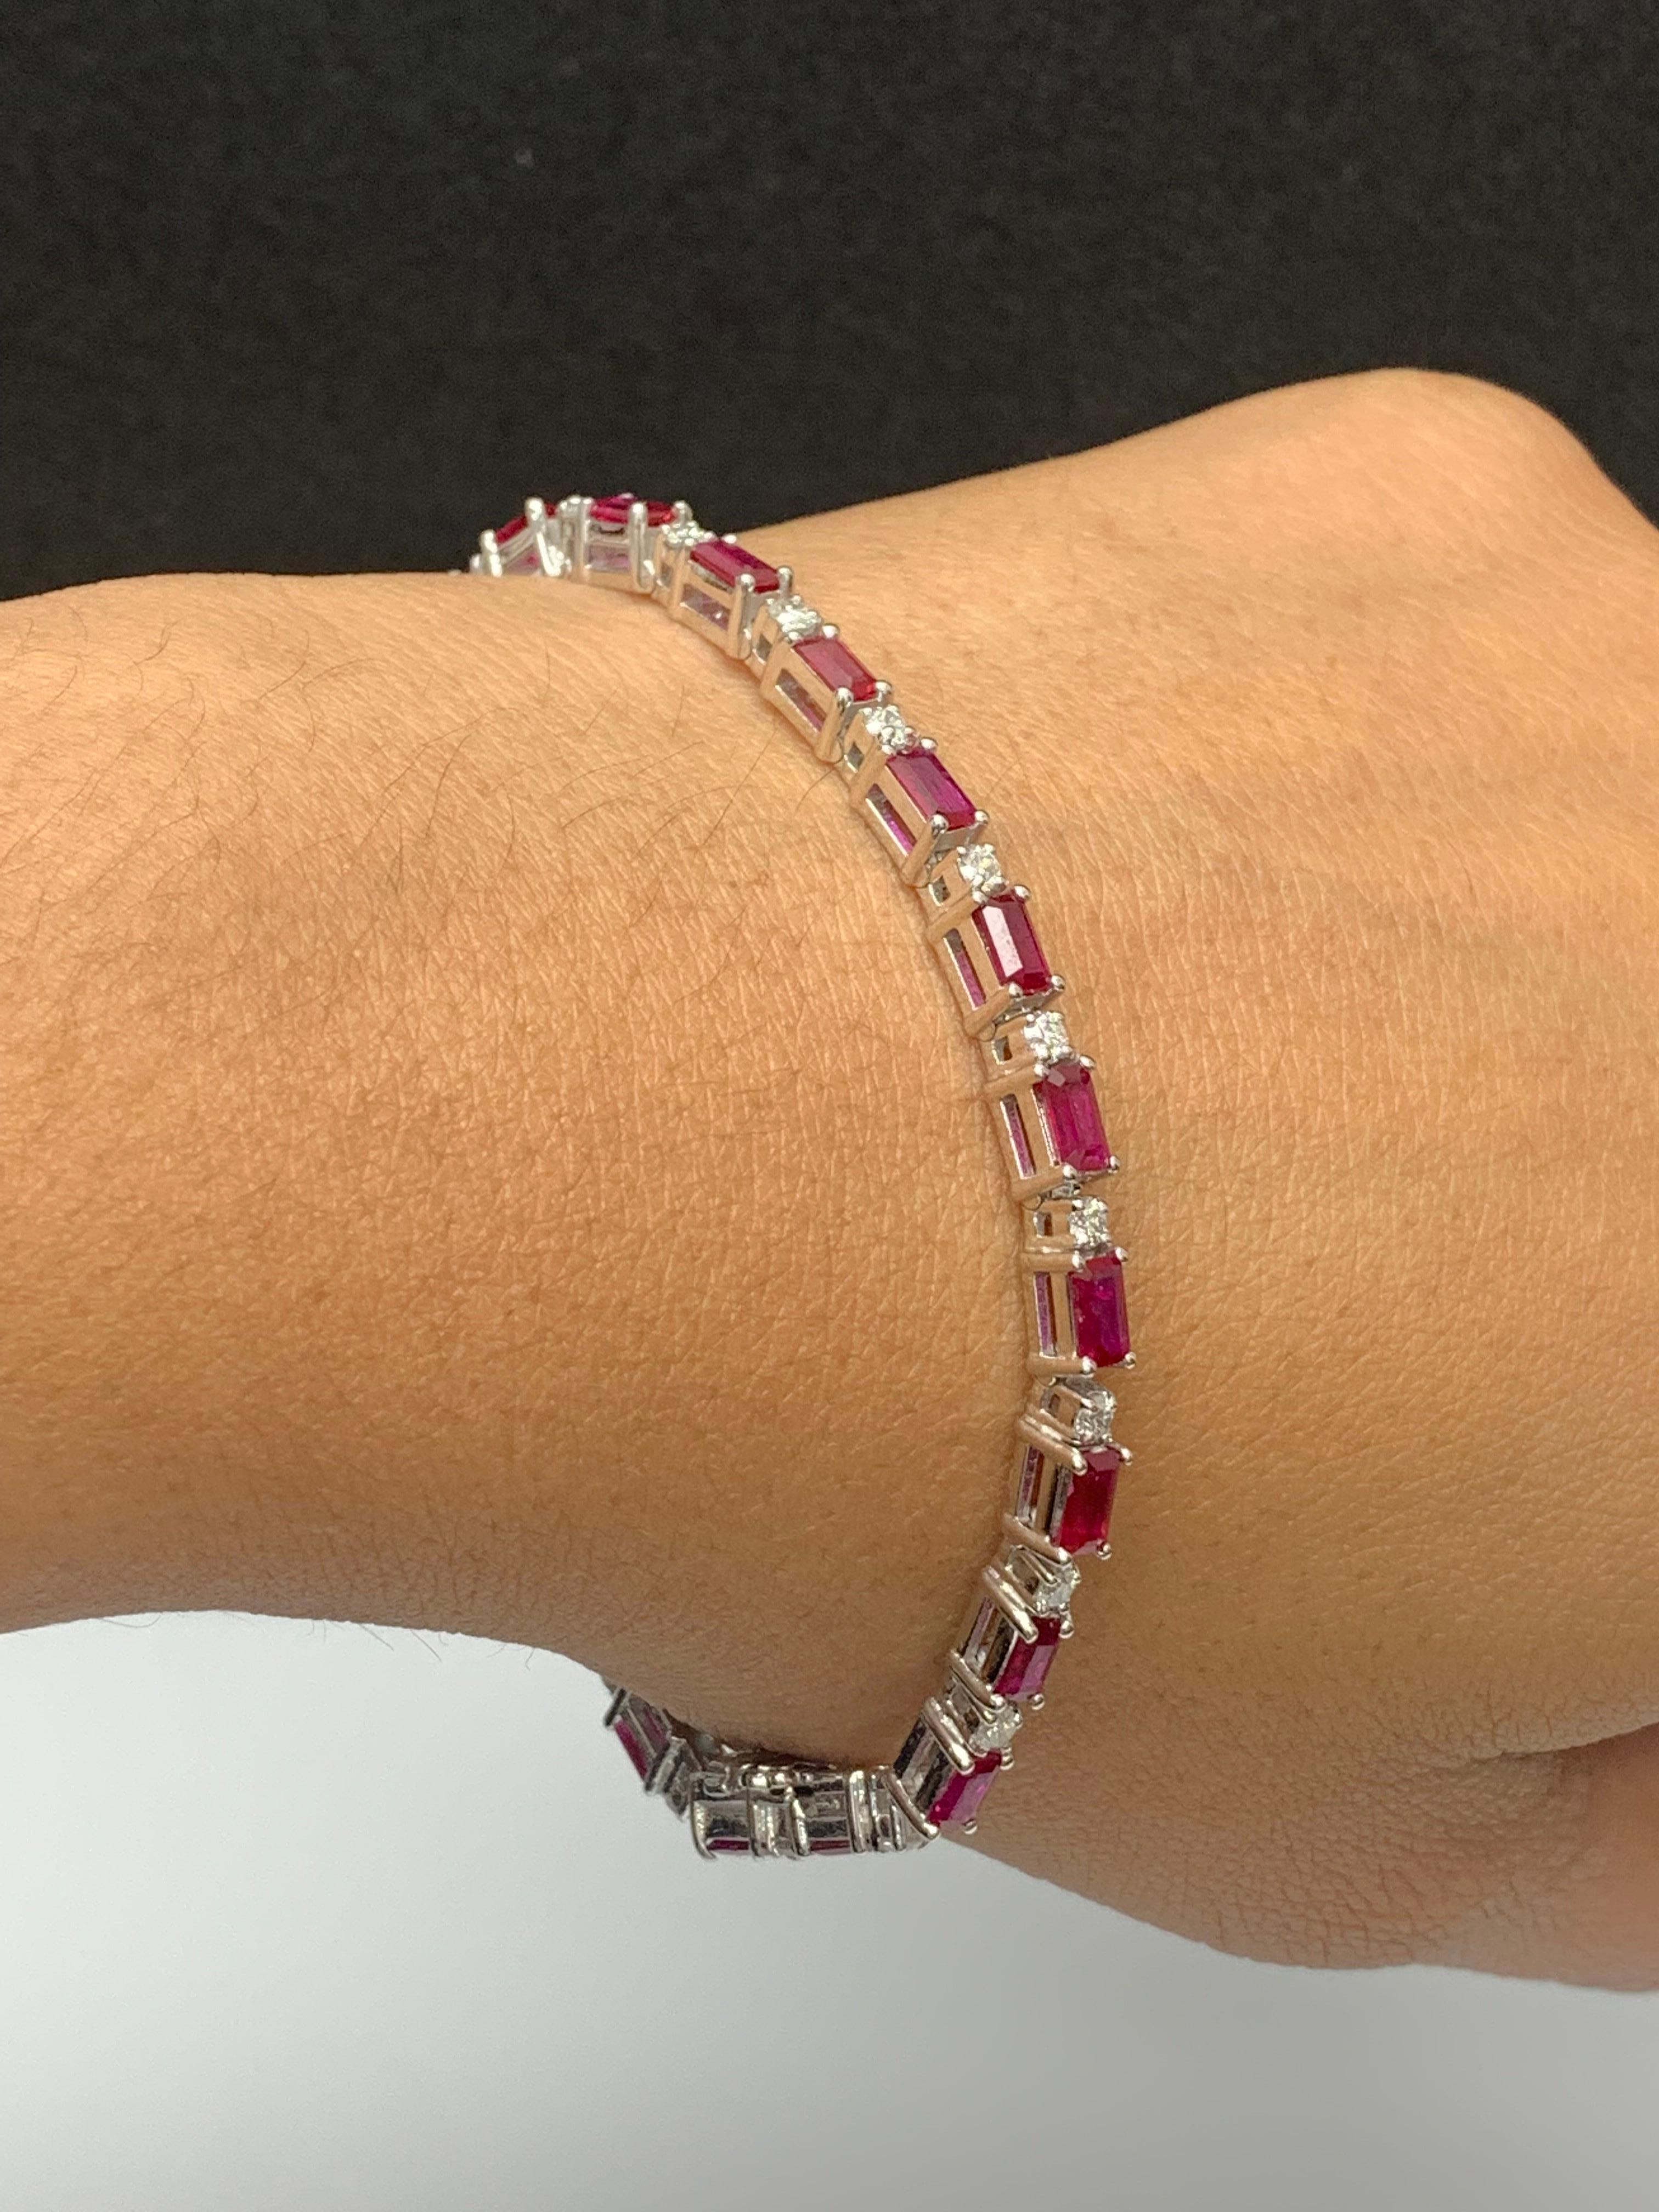 6.20 Carat Emerald Cut Ruby and Diamond Bracelet in 14K White Gold For Sale 3